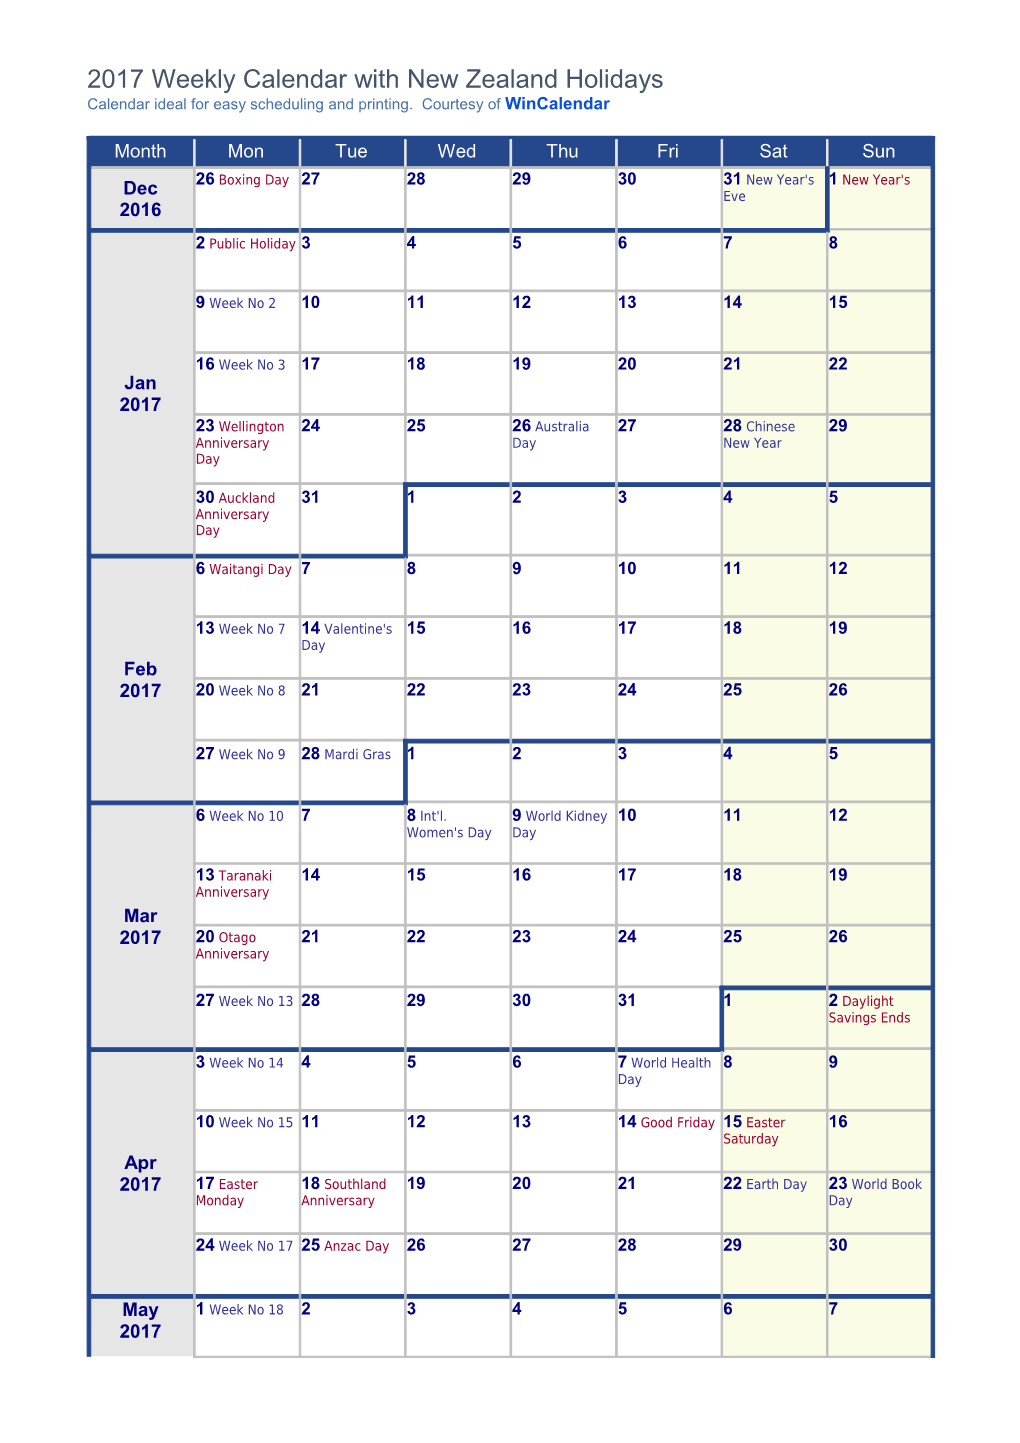 Weekly Calendar 2017 with Festive and National Holidays New Zealand